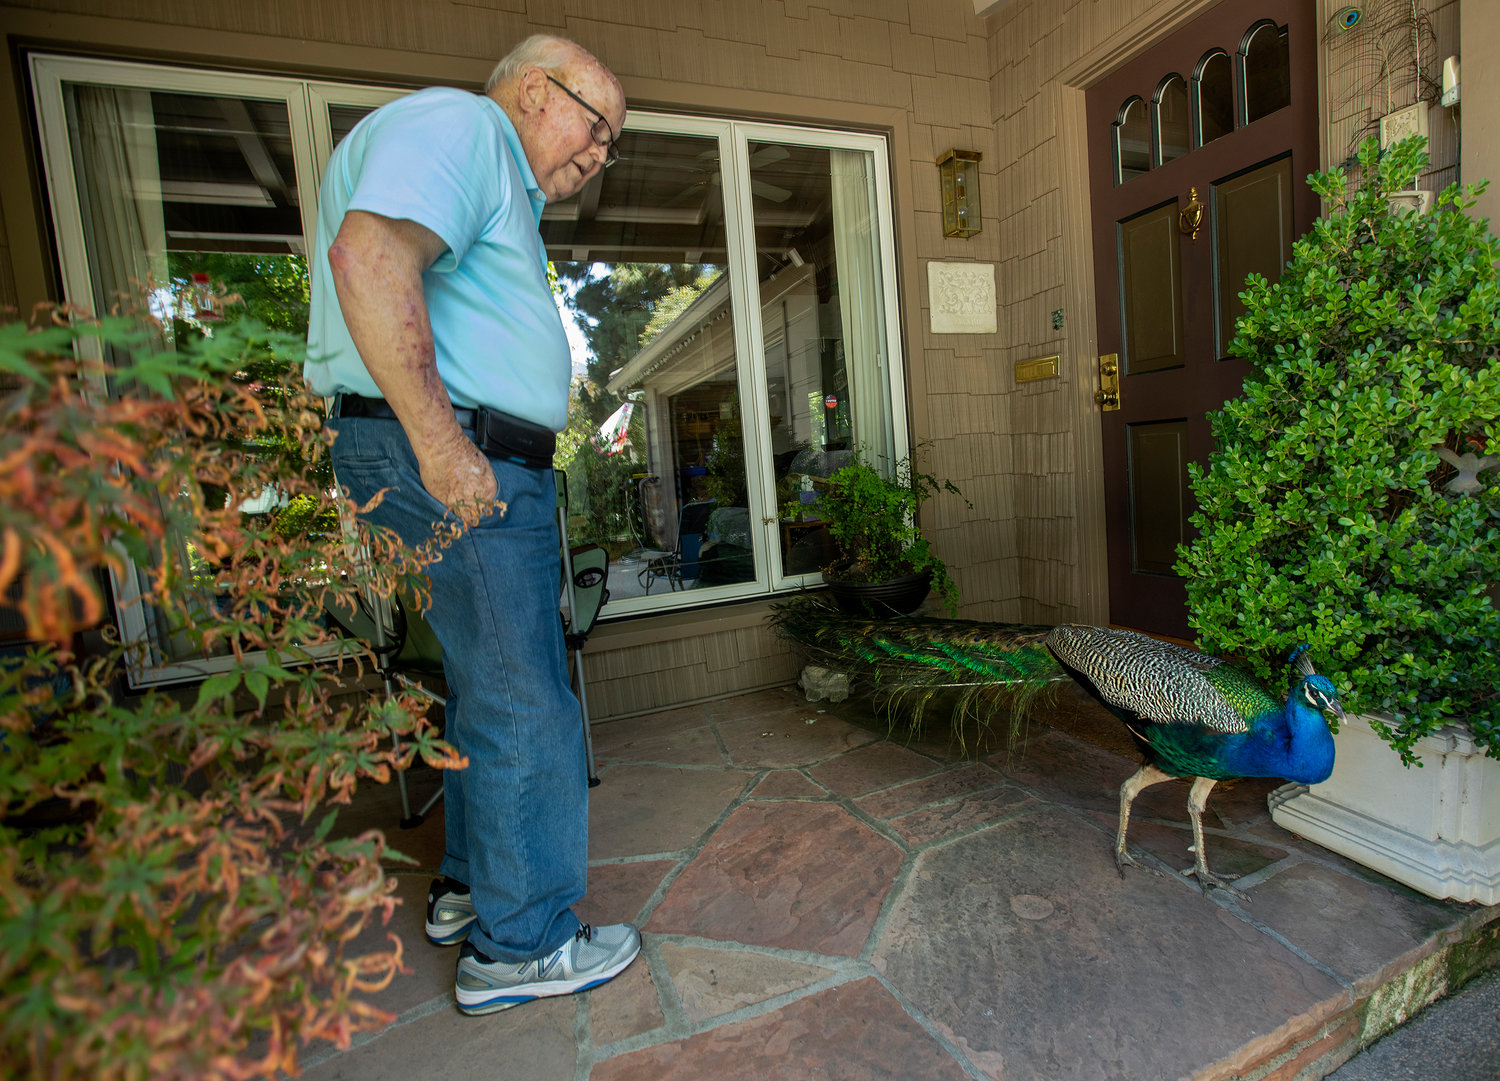 John Wickham greets a male peacock that he nicknamed "Charlie," a regular visitor to his home on Mountain View Avenue, on June 10, 2021 in Pasadena, California. (Mel Melcon/Los Angeles Times/TNS)